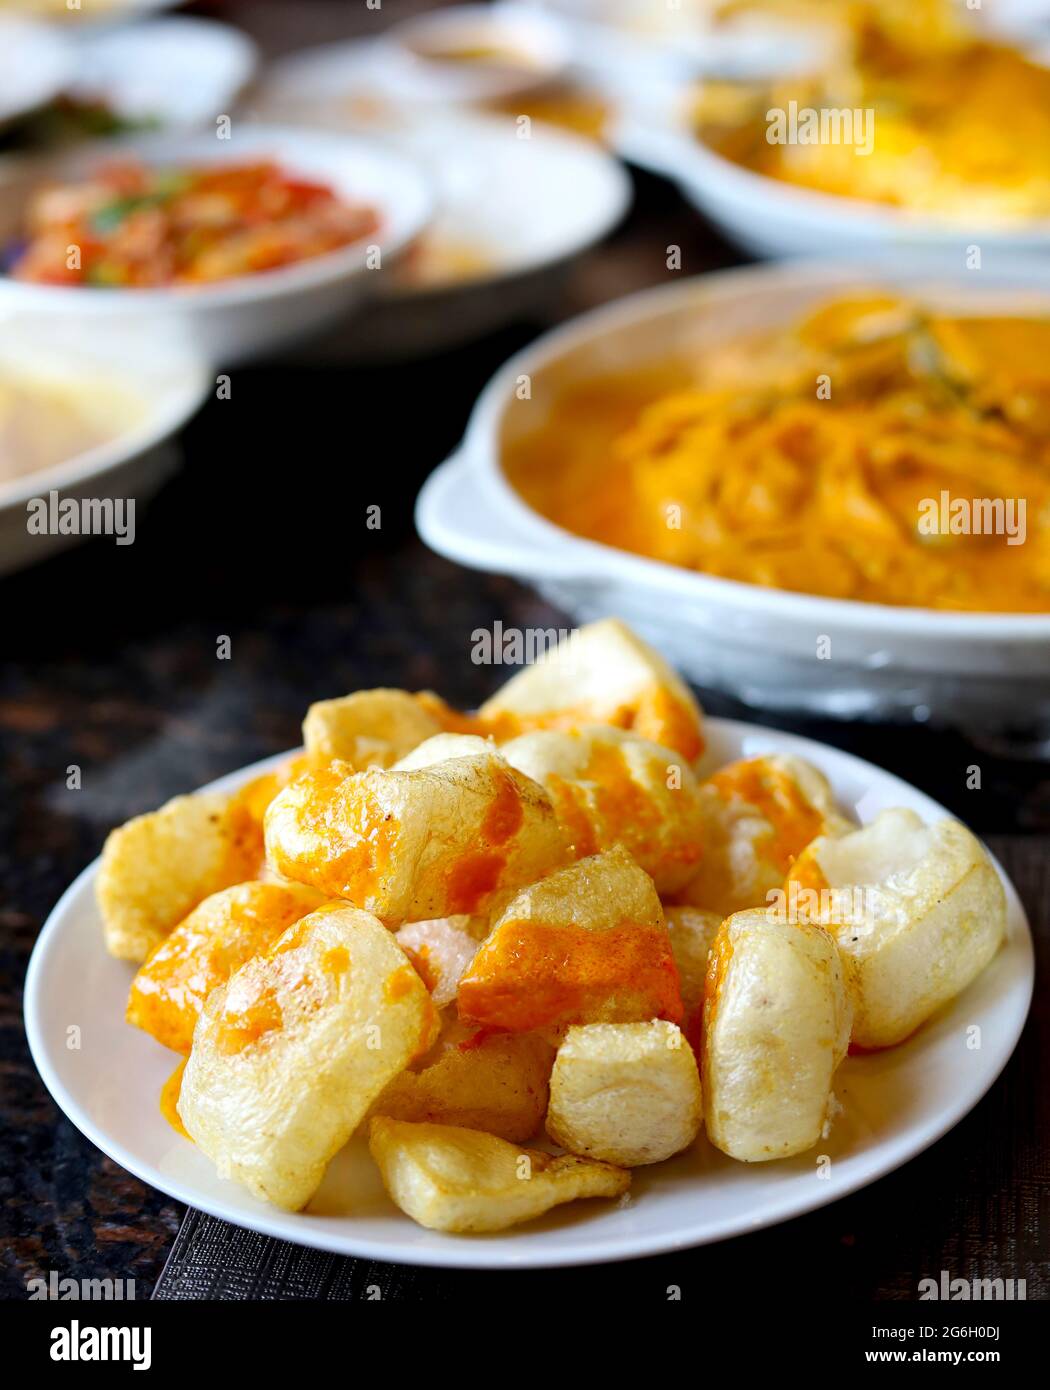 Rambak, jangek or kerupuk kulit is an Indonesian traditional crackers. It is made from the skin of cow, served with curry sauce - delicious and tasty Stock Photo